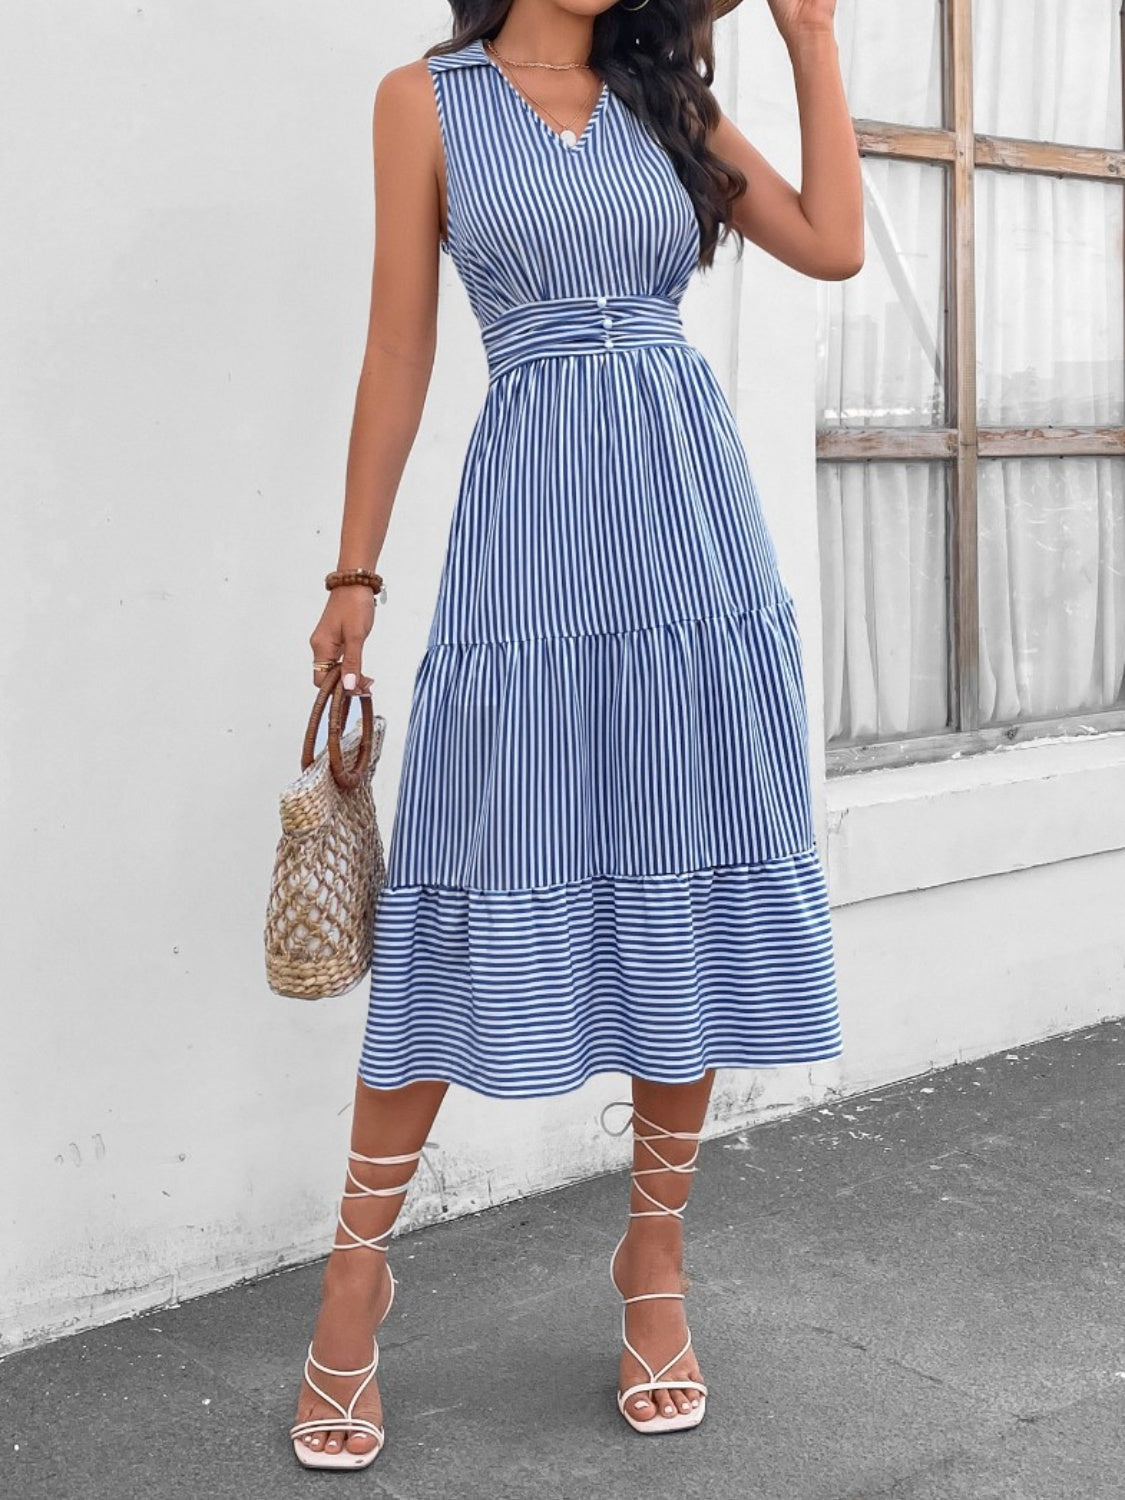 Chic striped midi dress with Johnny collar and waist cinching. Versatile, with pockets and available in 7 colors. Perfect for any occasion.